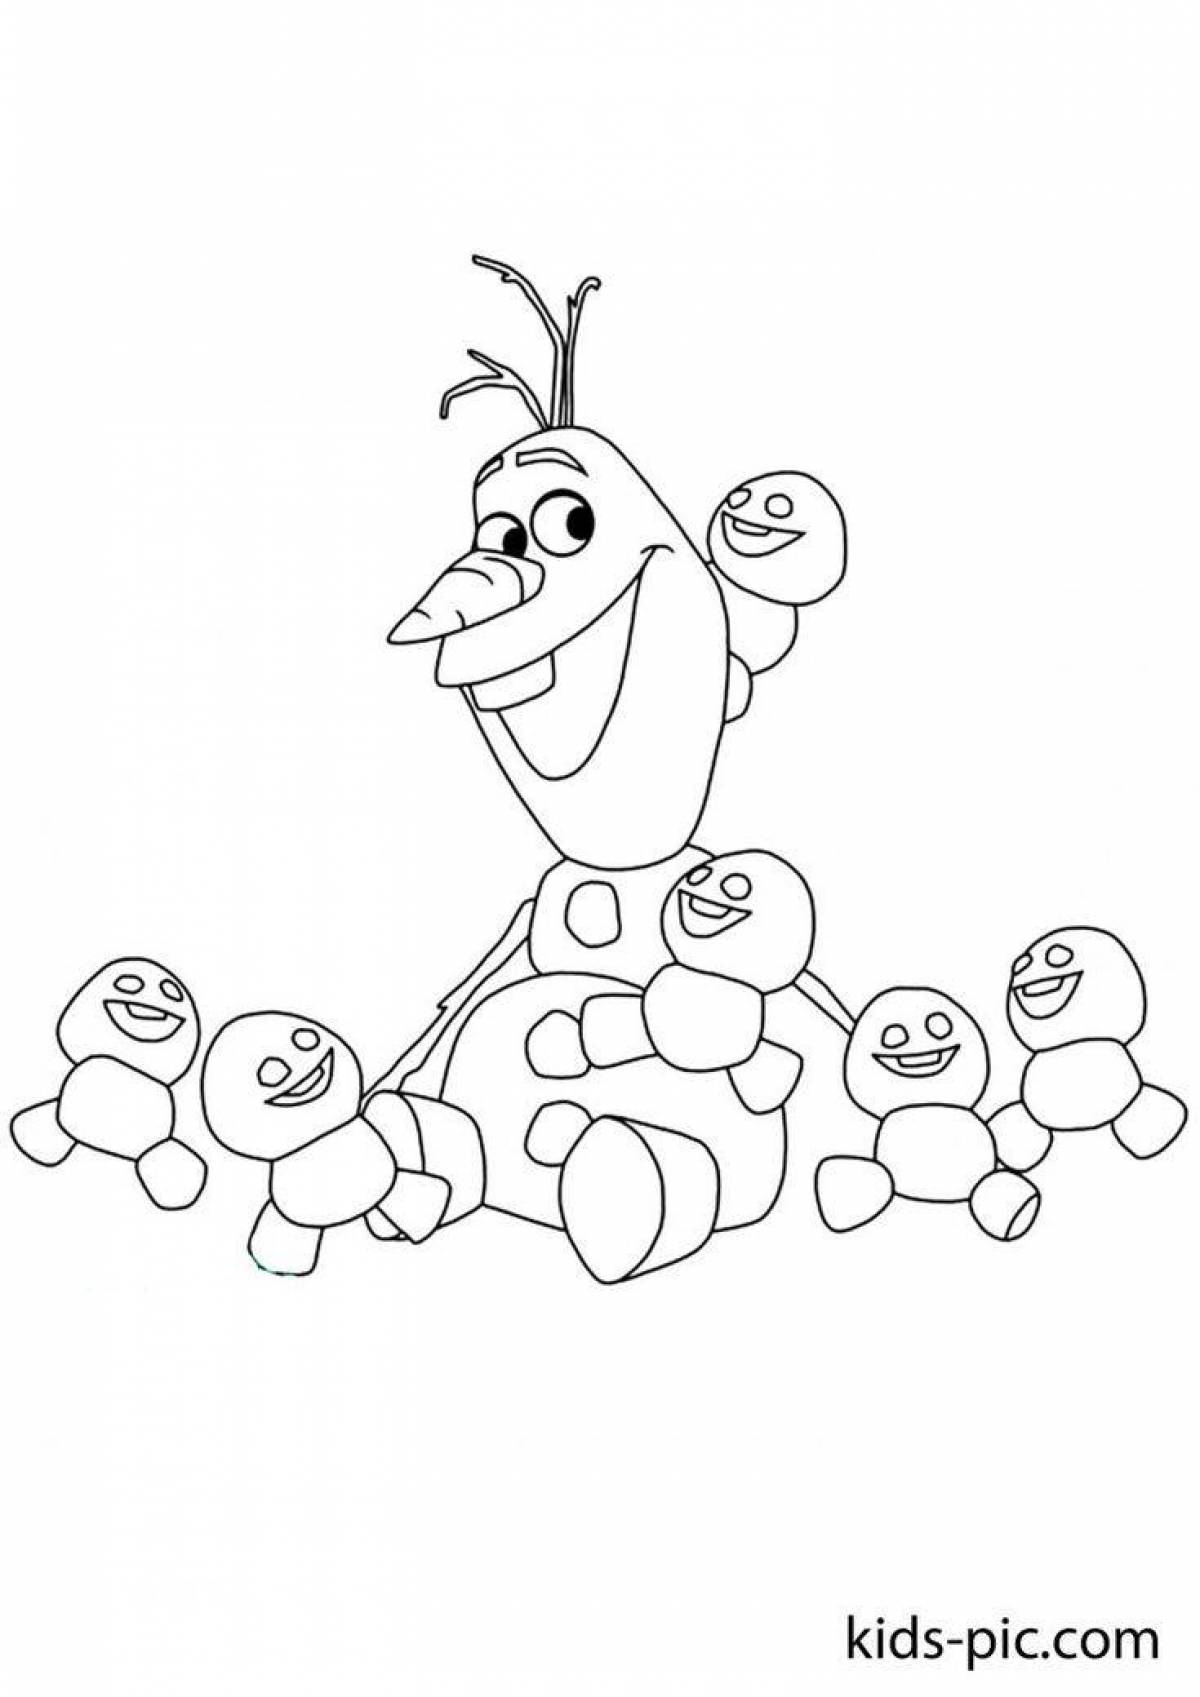 Olaf funny coloring book